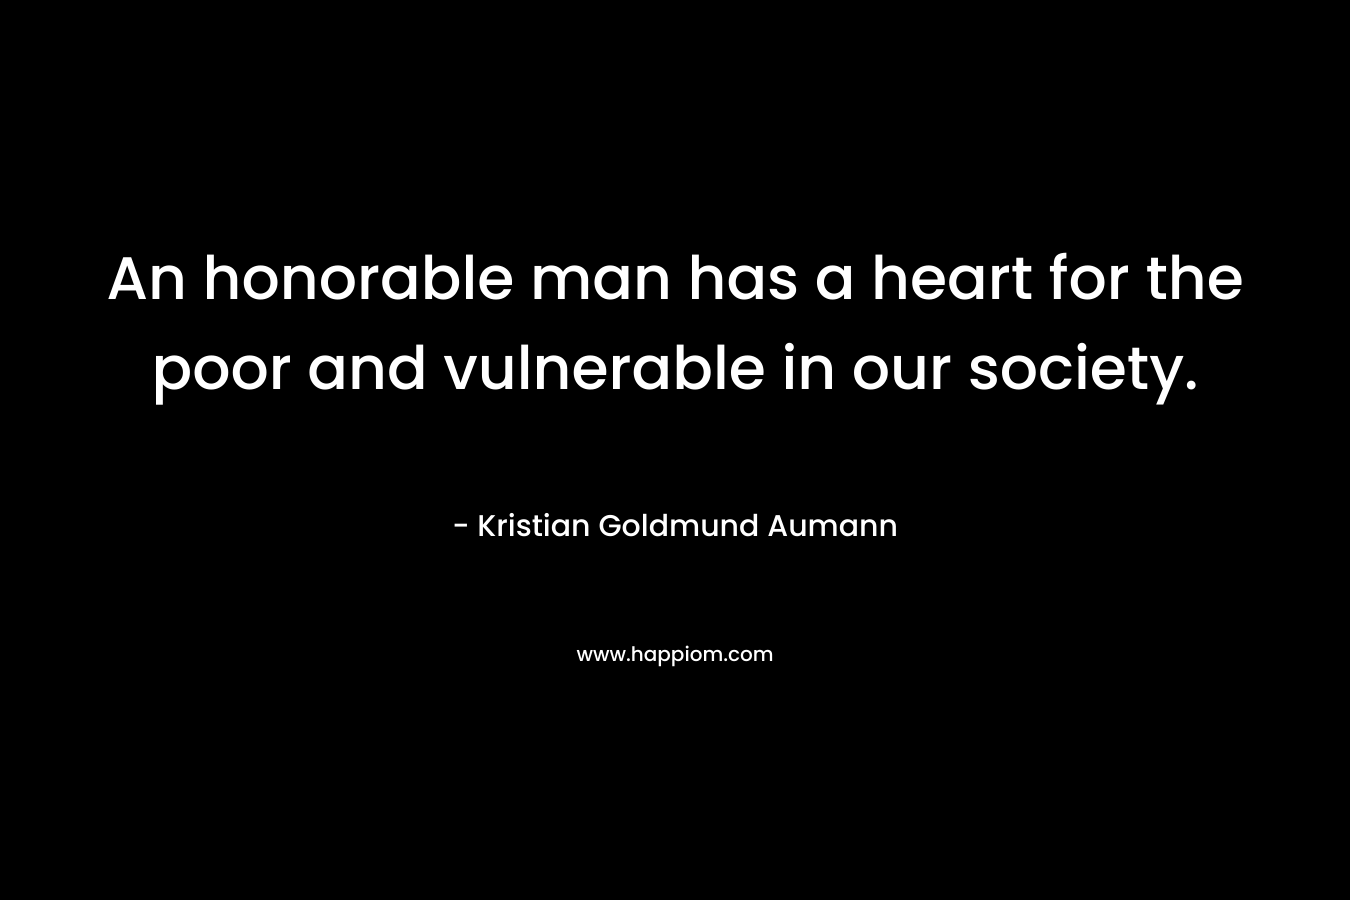 An honorable man has a heart for the poor and vulnerable in our society.